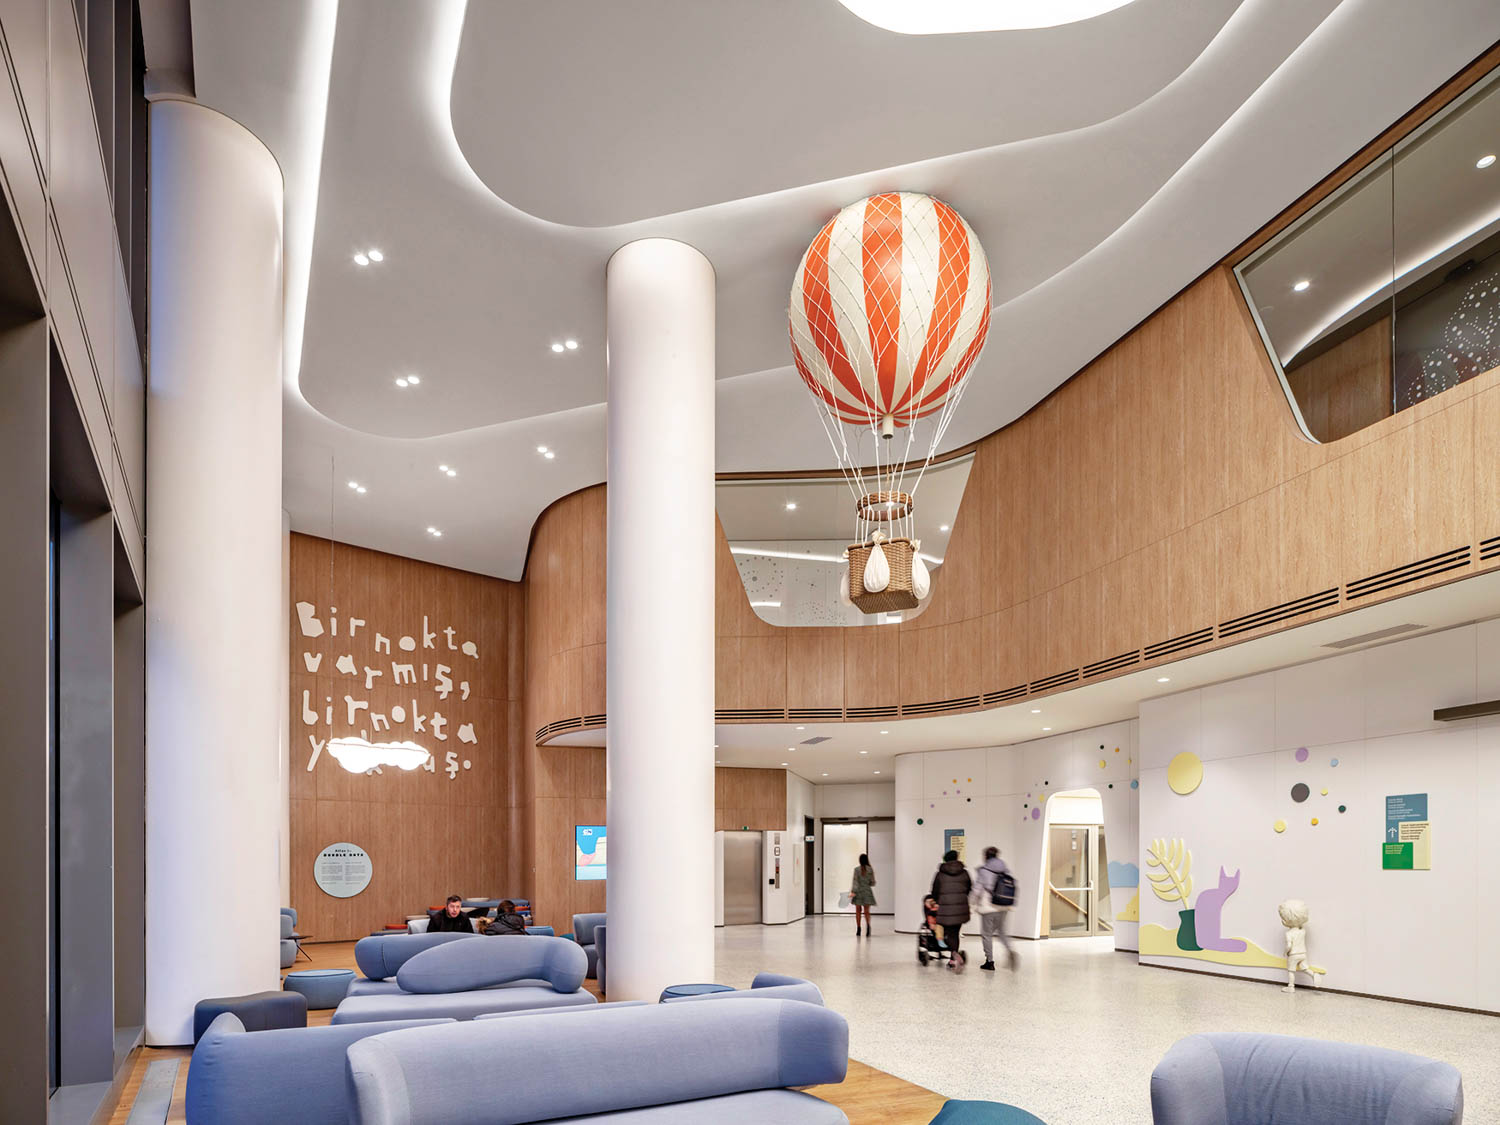 the children's pavilion of Acibadem Healthcare Group with a floating hot air balloon artwork